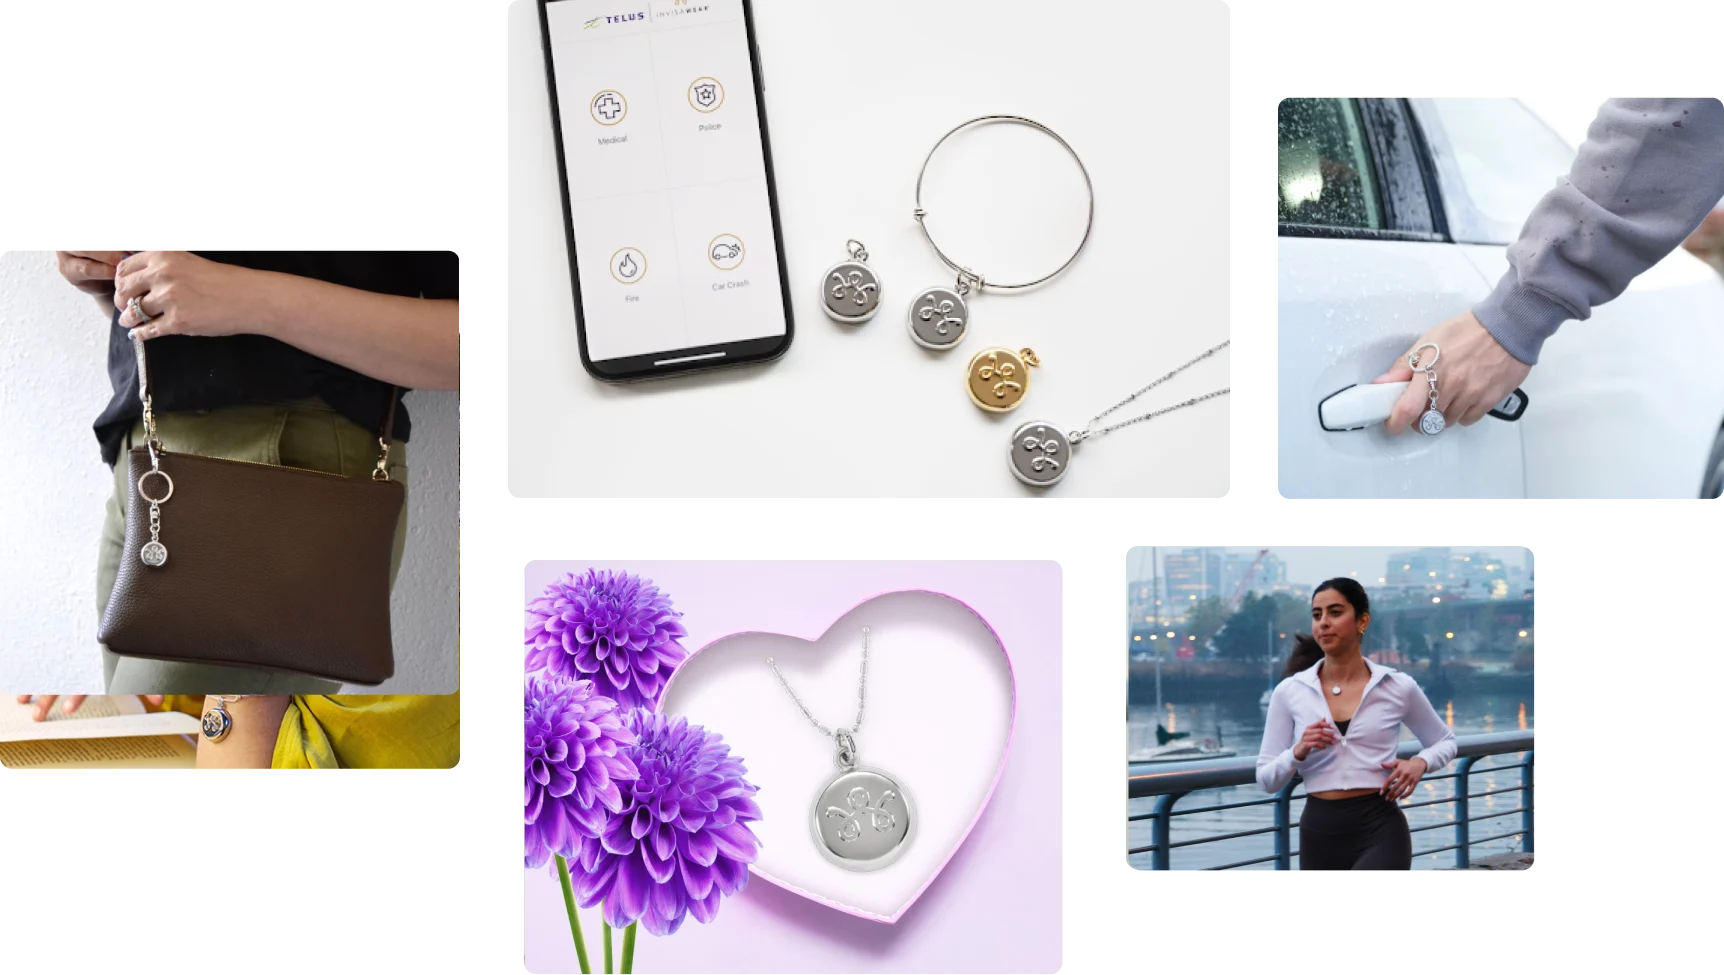 A collage showcasing various safety devices surrounds a heart-shaped box, symbolizing the precious gift of security that SmartWear offers to your loved ones.